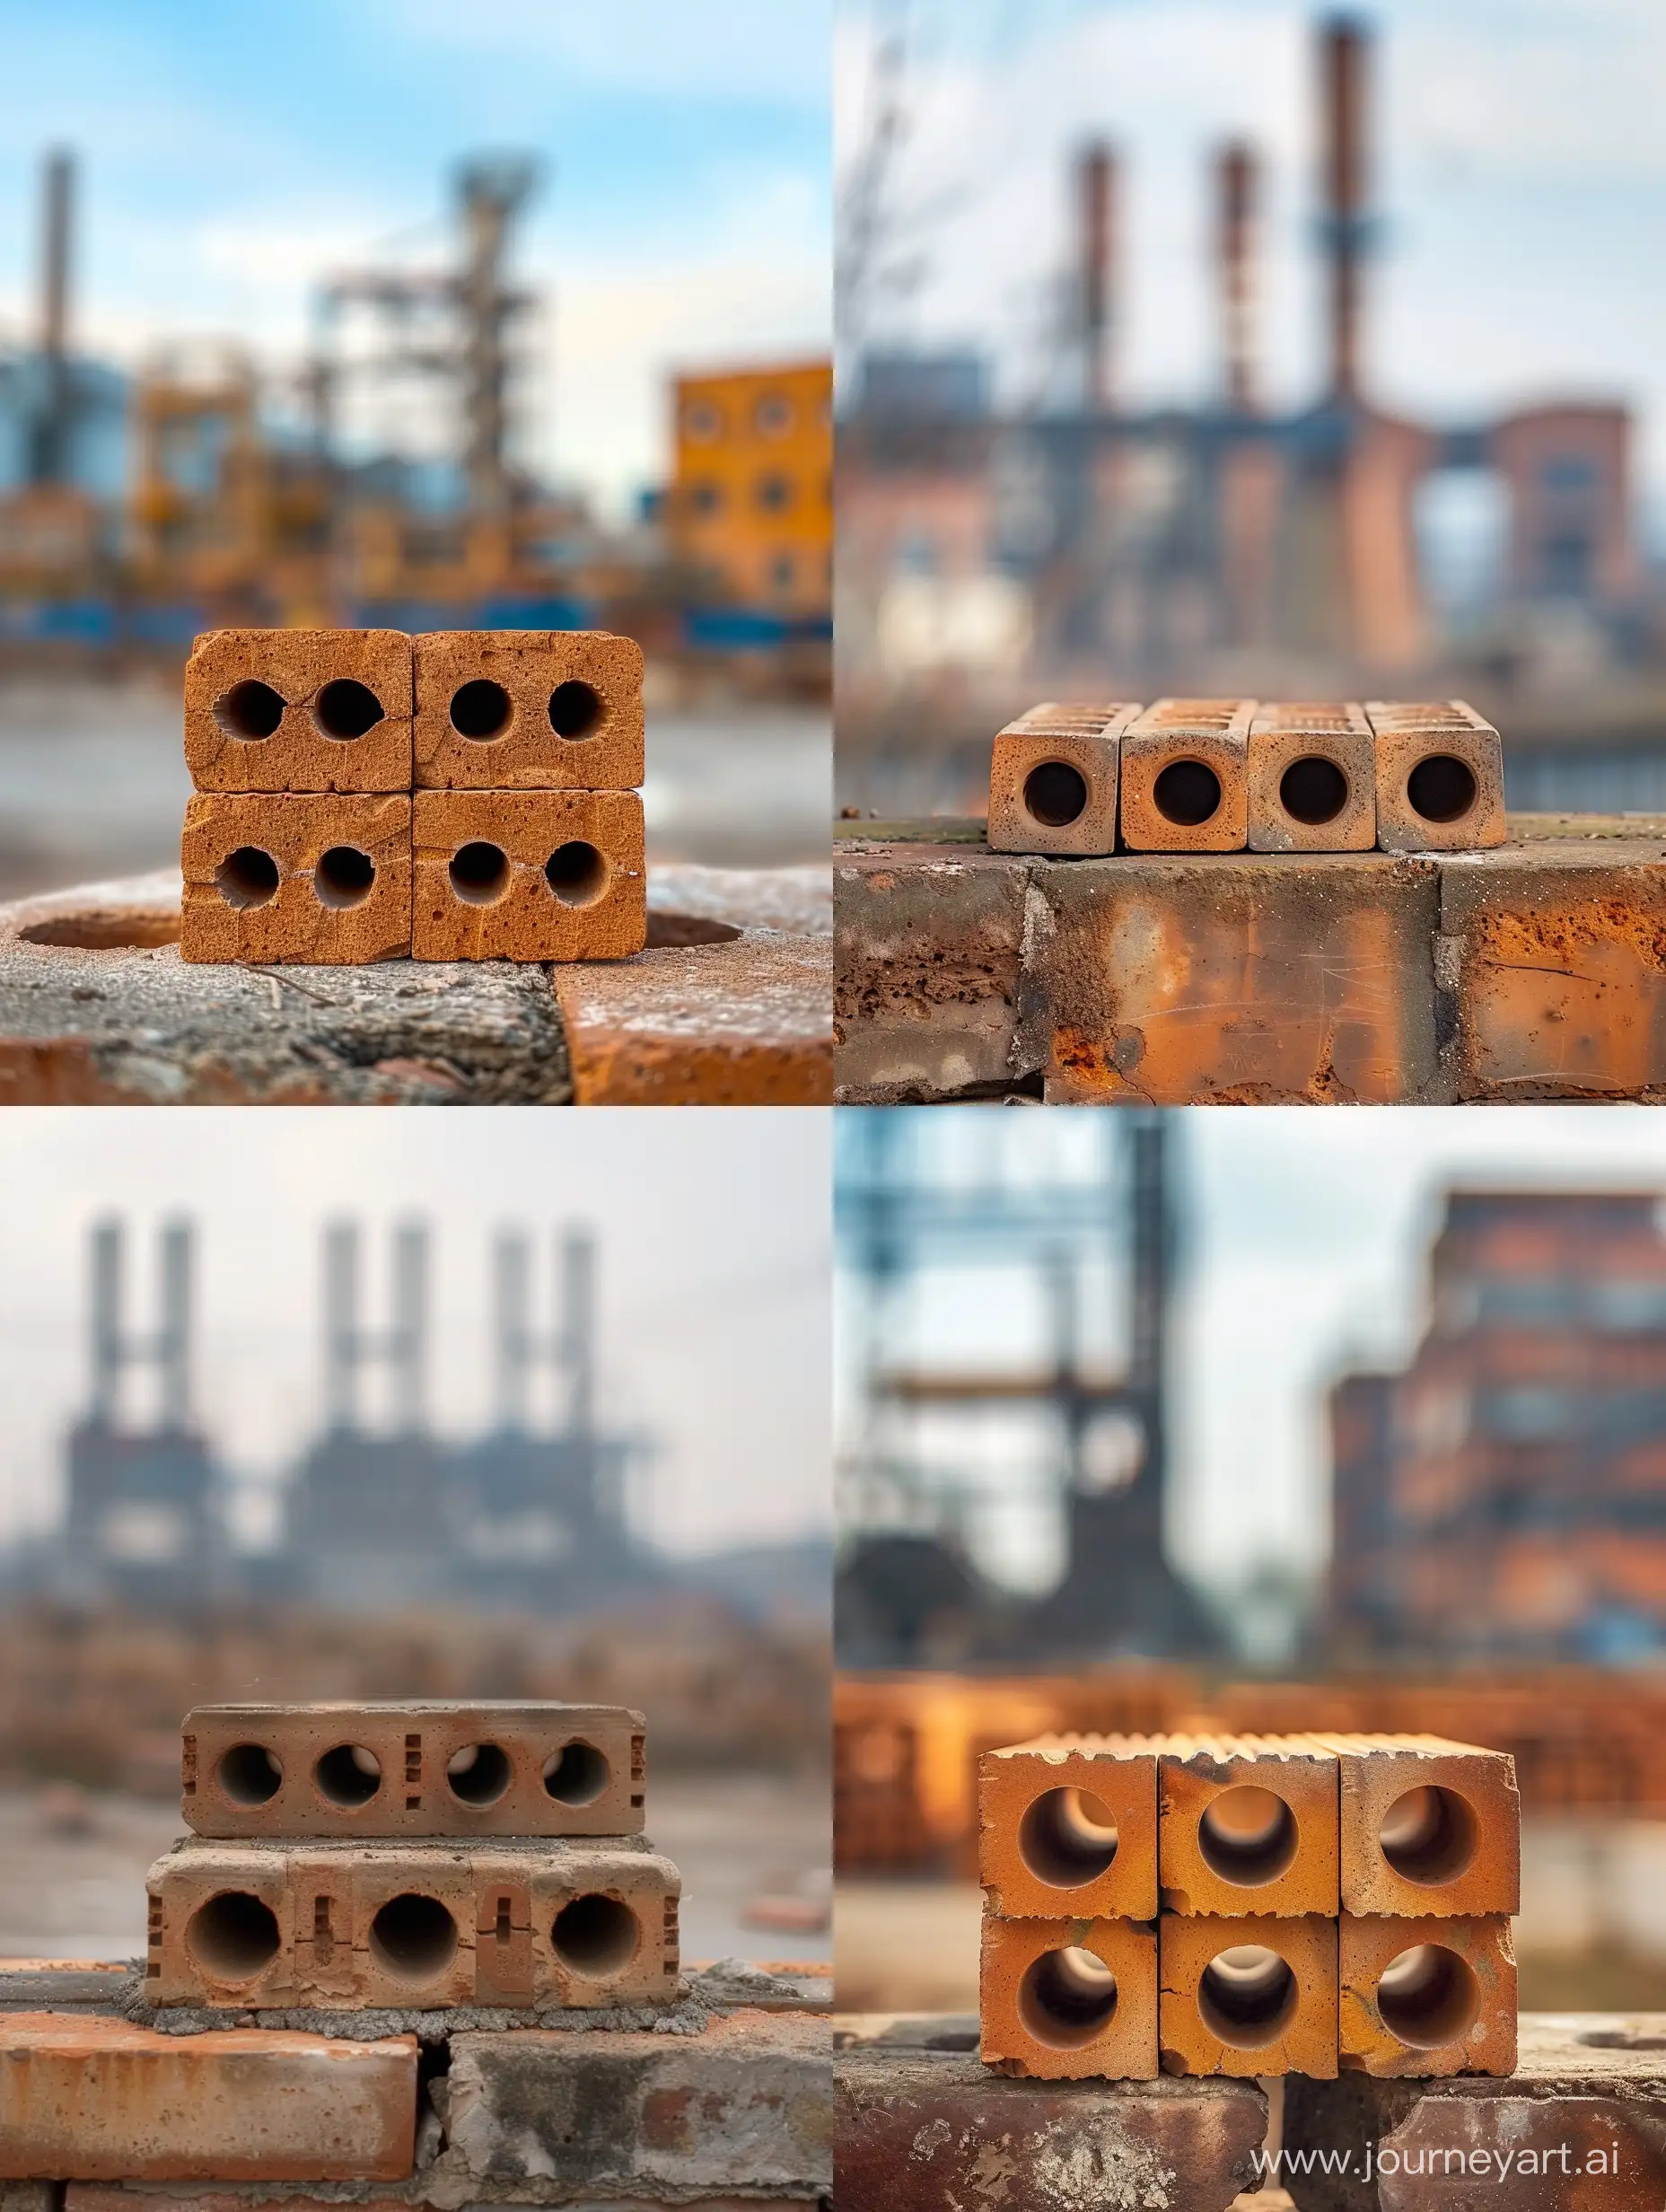 3 hole grooved brick palced on each other, the background is a brick factory blurred out